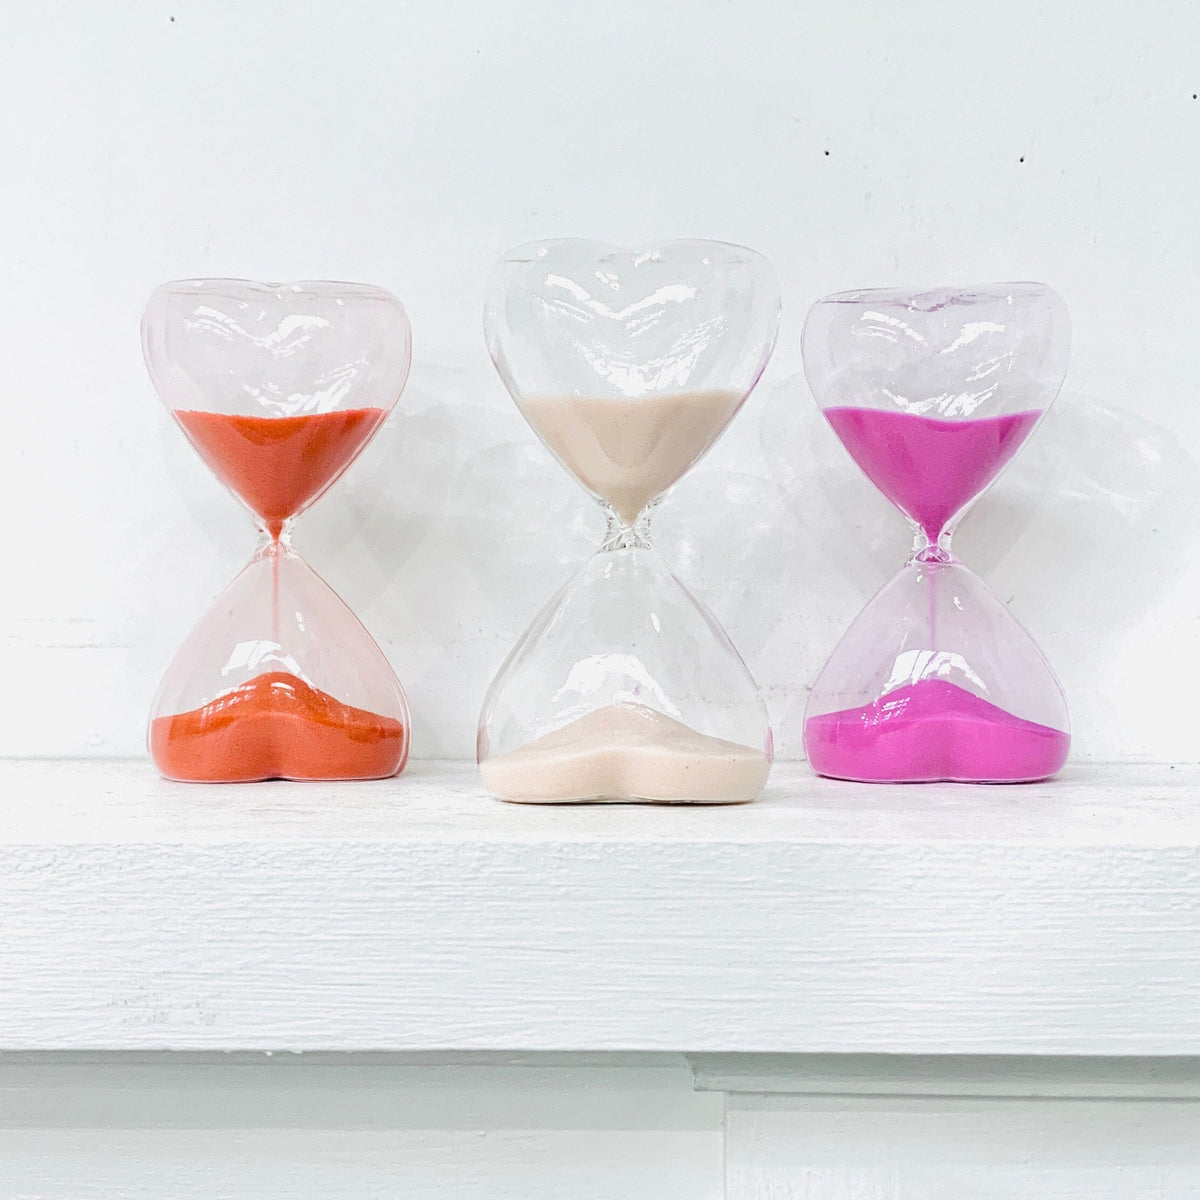 Time For Love - Valentines Heart Hour Glass, Dusky Pink Decor One Hundred 80 Degrees 